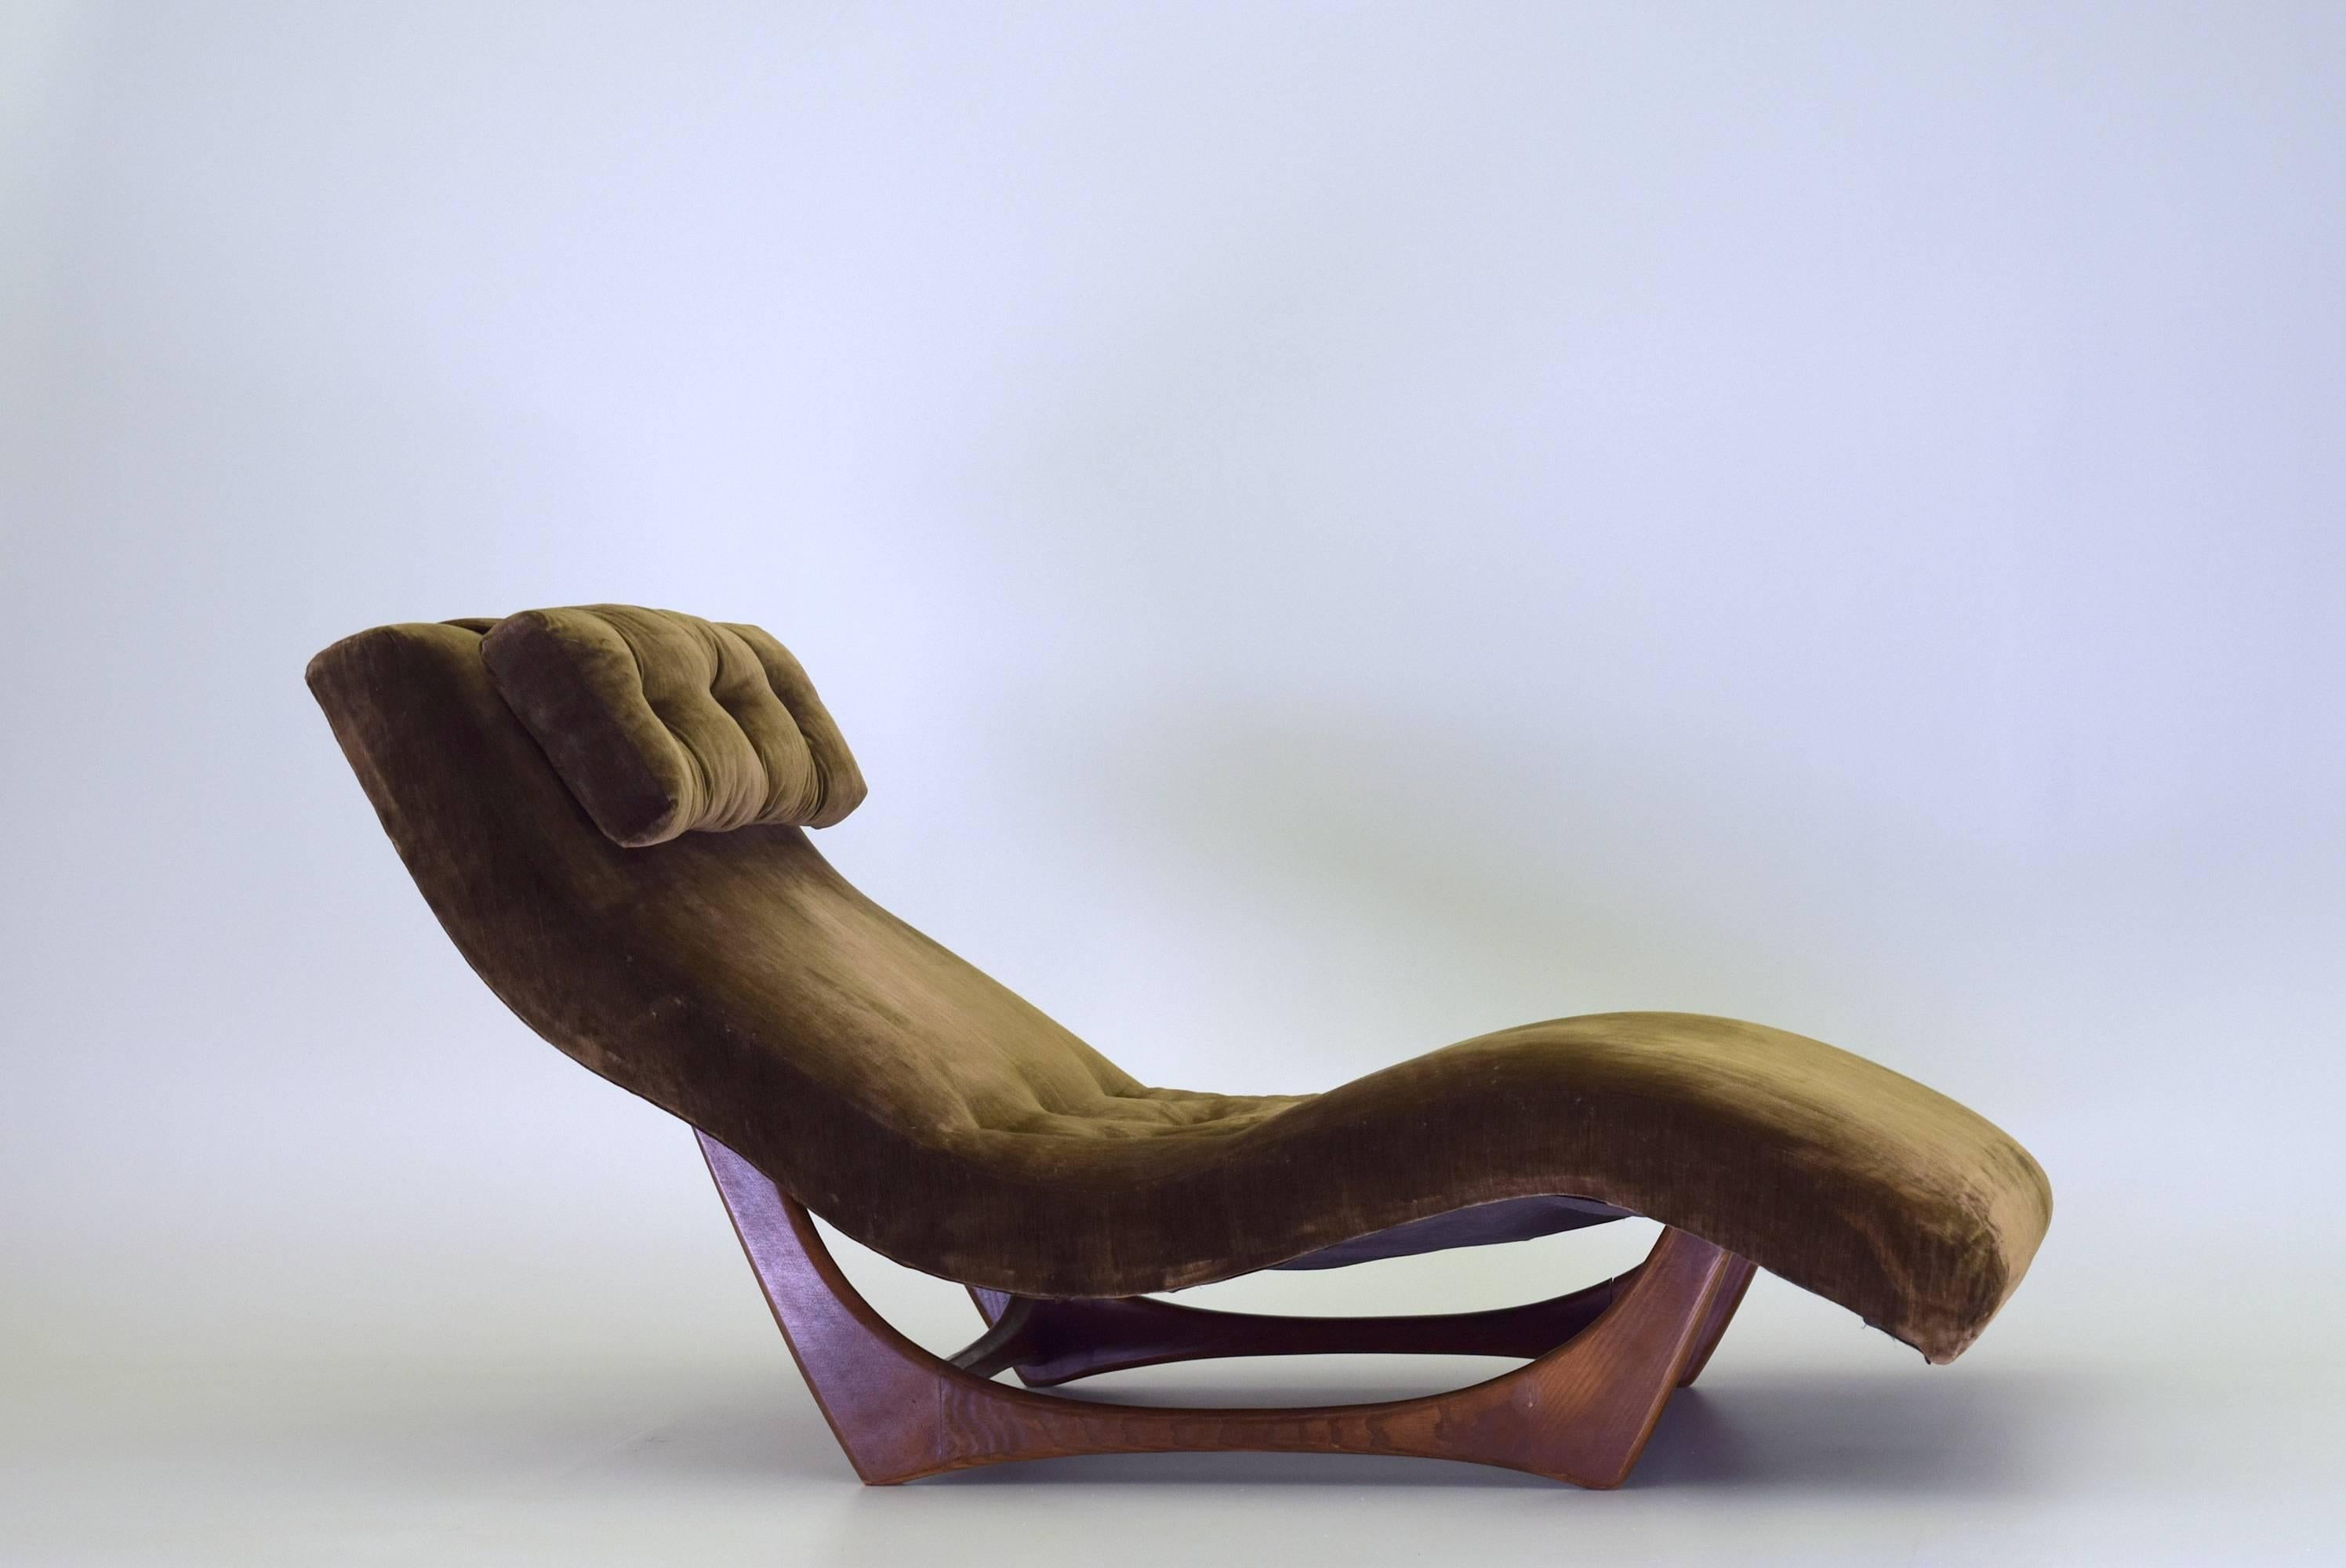 Ultra stylish and comfortable mid century modern wave chaise lounge chair attributed to Adrian Pearsall's Craft Associates, circa 1966.  

This chaise lounge measures 60